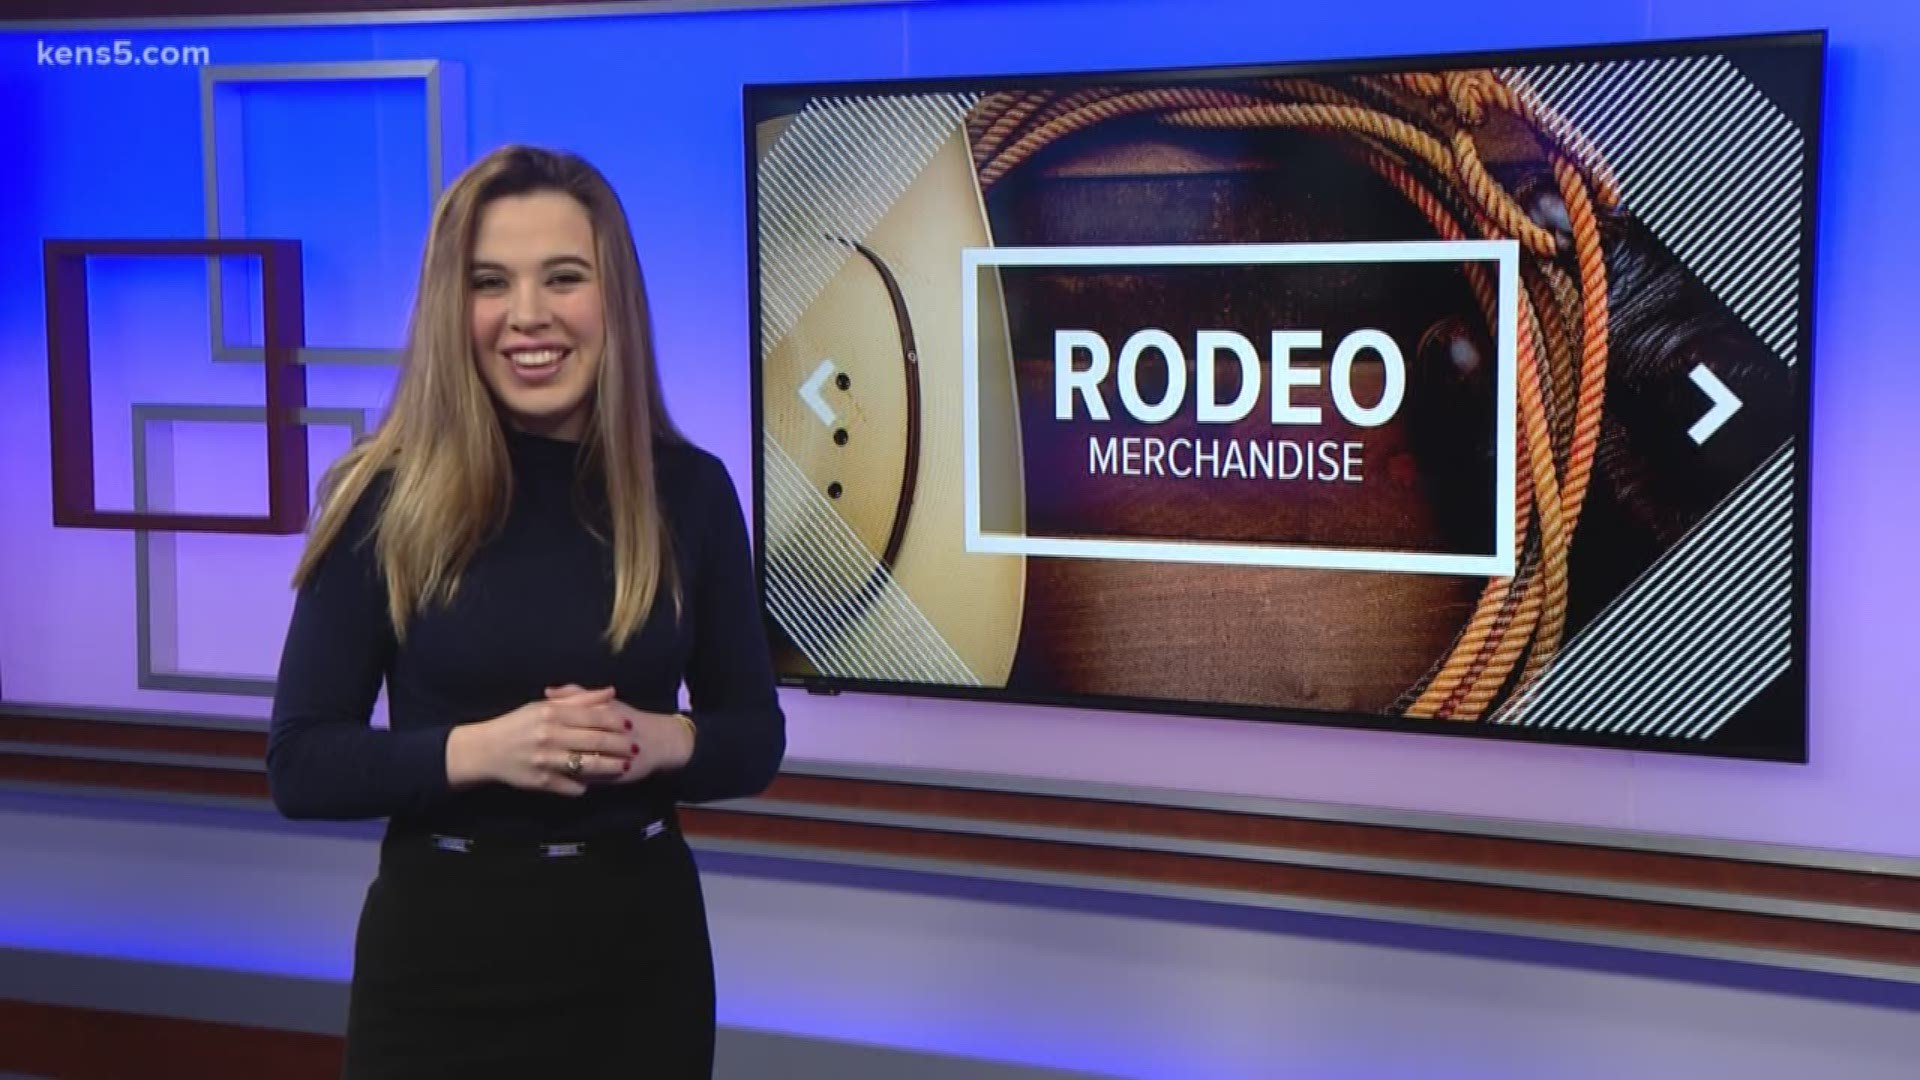 Need a cool T-shirt or hat to show you hit the Rodeo grounds? We've got you covered. Digital journalist Lexi Hazlett shares more.